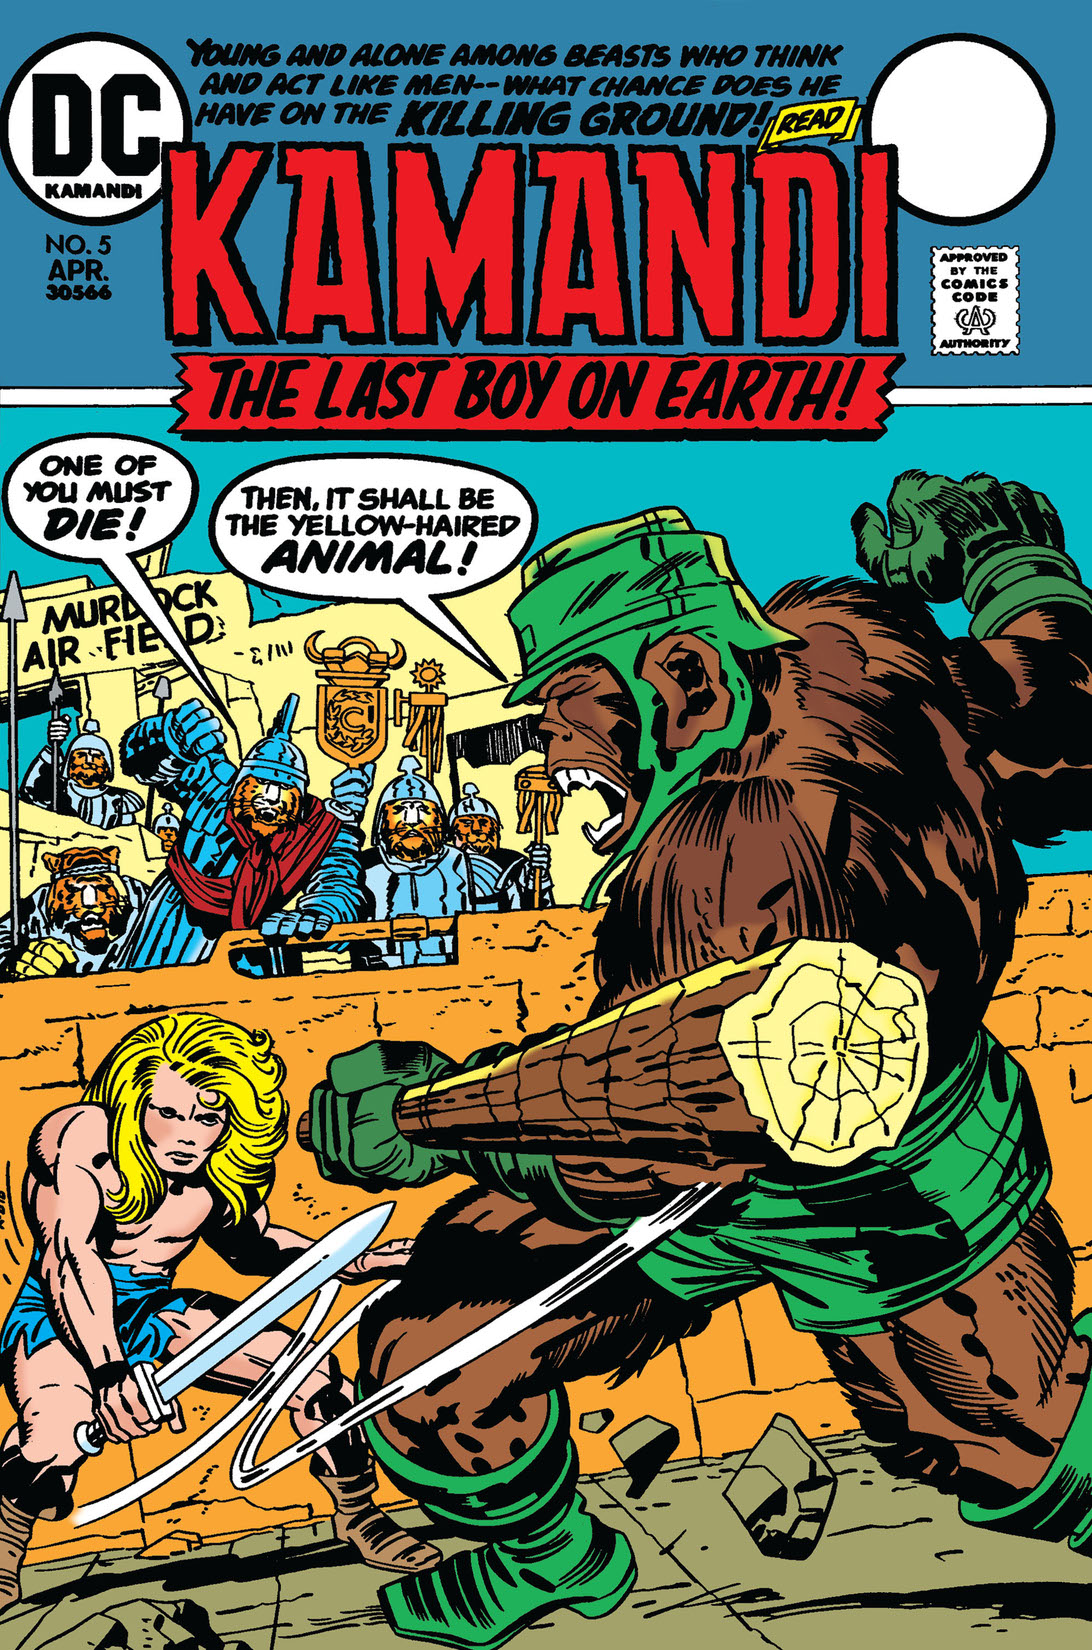 Kamandi: The Last Boy on Earth #5 preview images